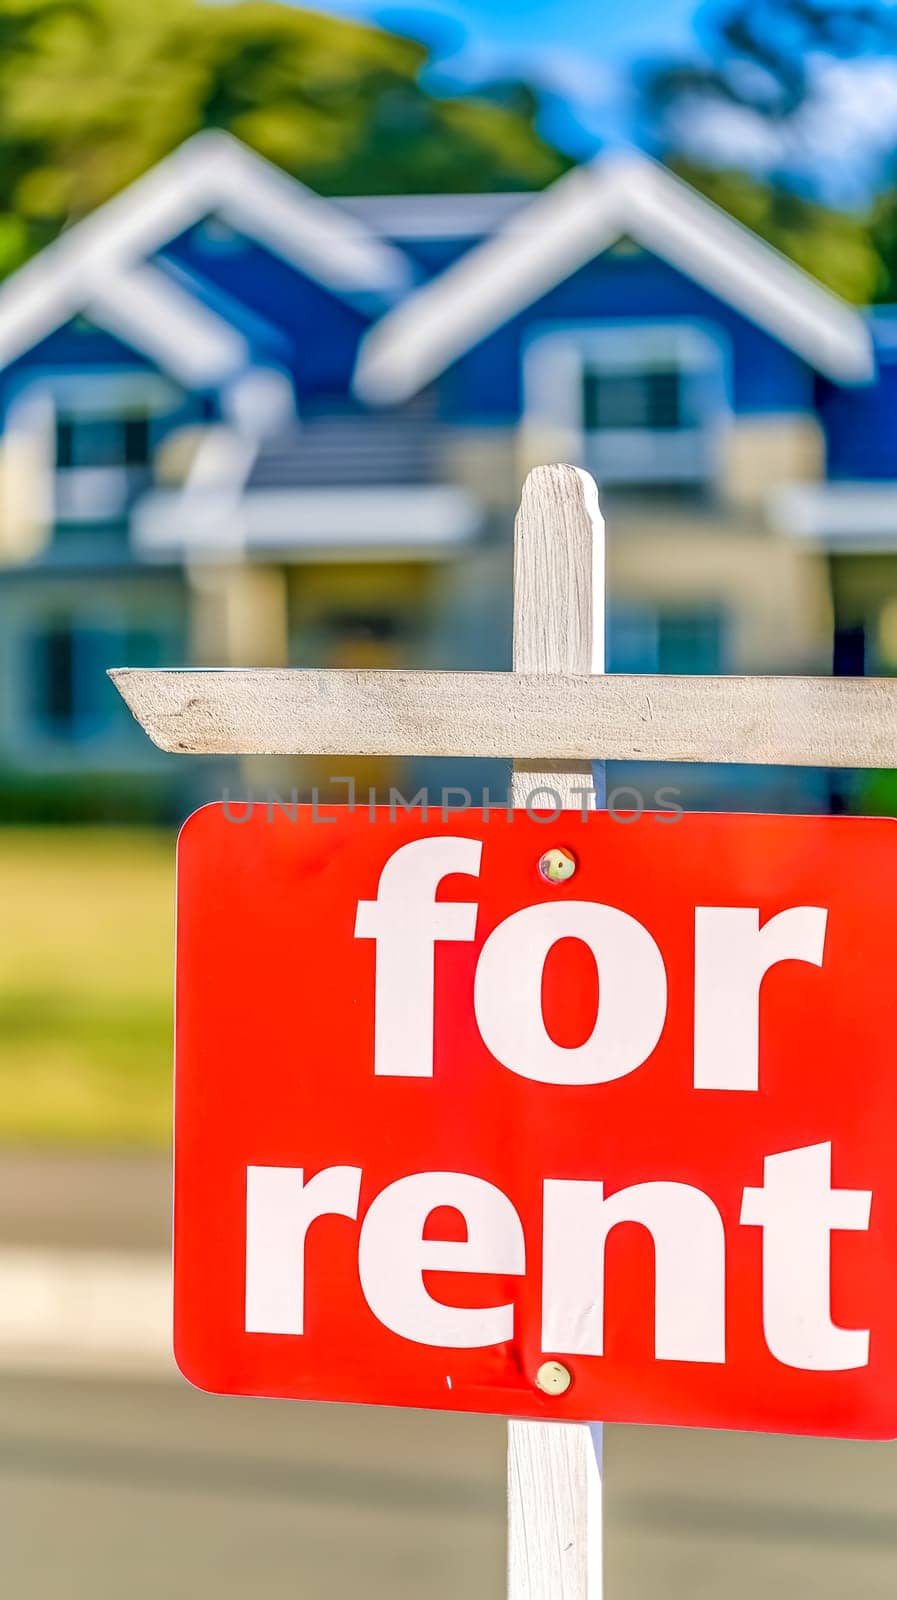 sign with the words "For Rent" prominently displayed in bold lettering, set against a background of a blurred house, creating a clear visual indication of a property space available for rent, vertical